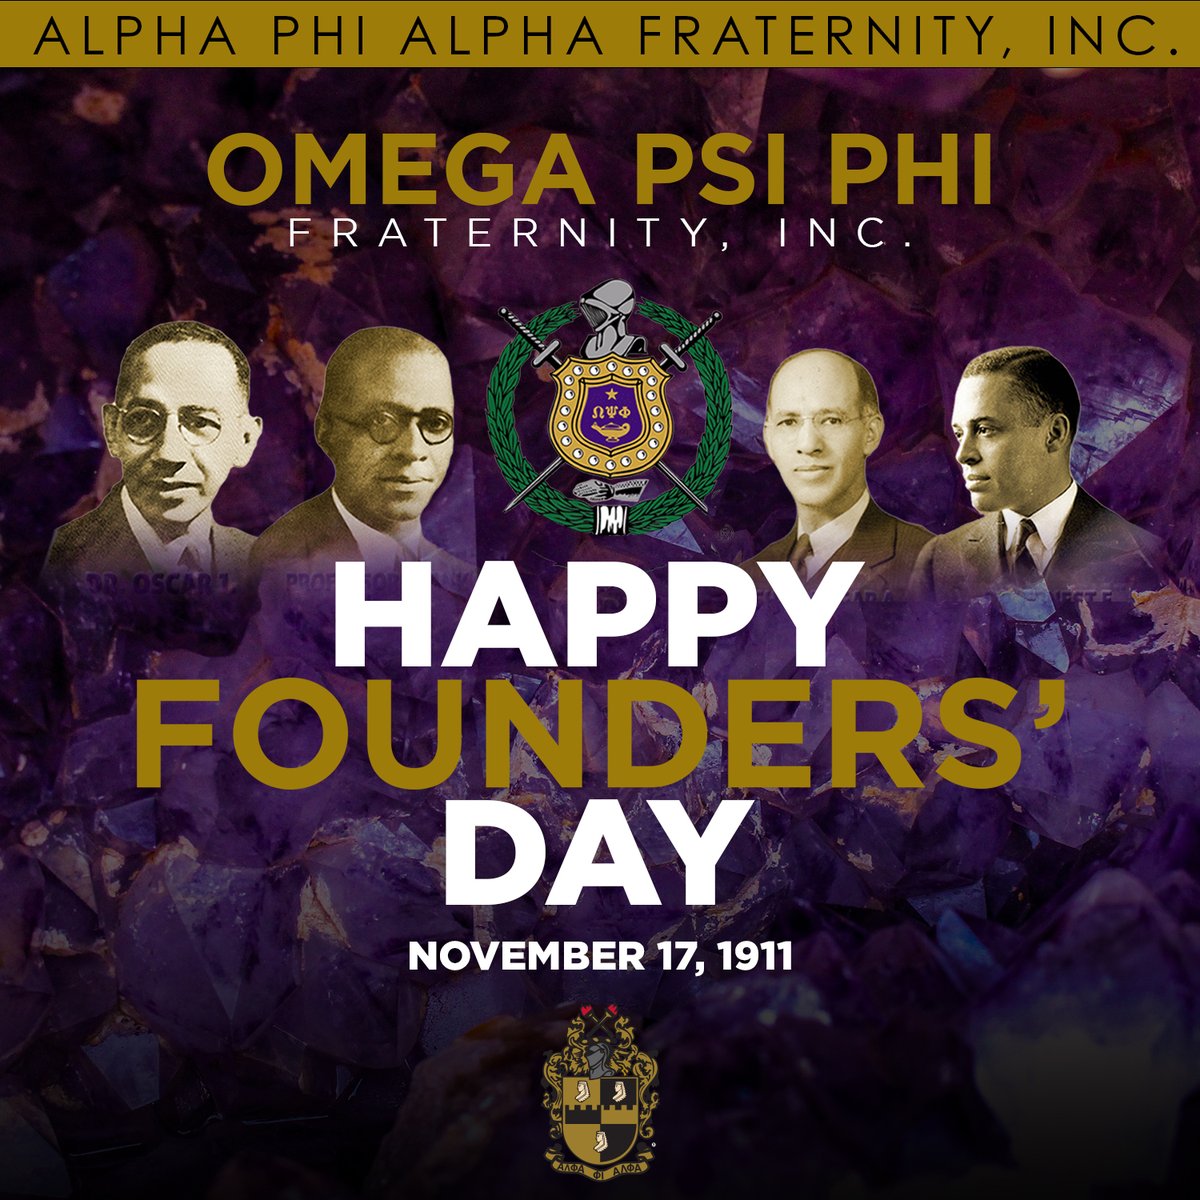 Alpha Phi Alpha Fraternity, Inc. wishes the men of Omega Psi Phi Fraternity...